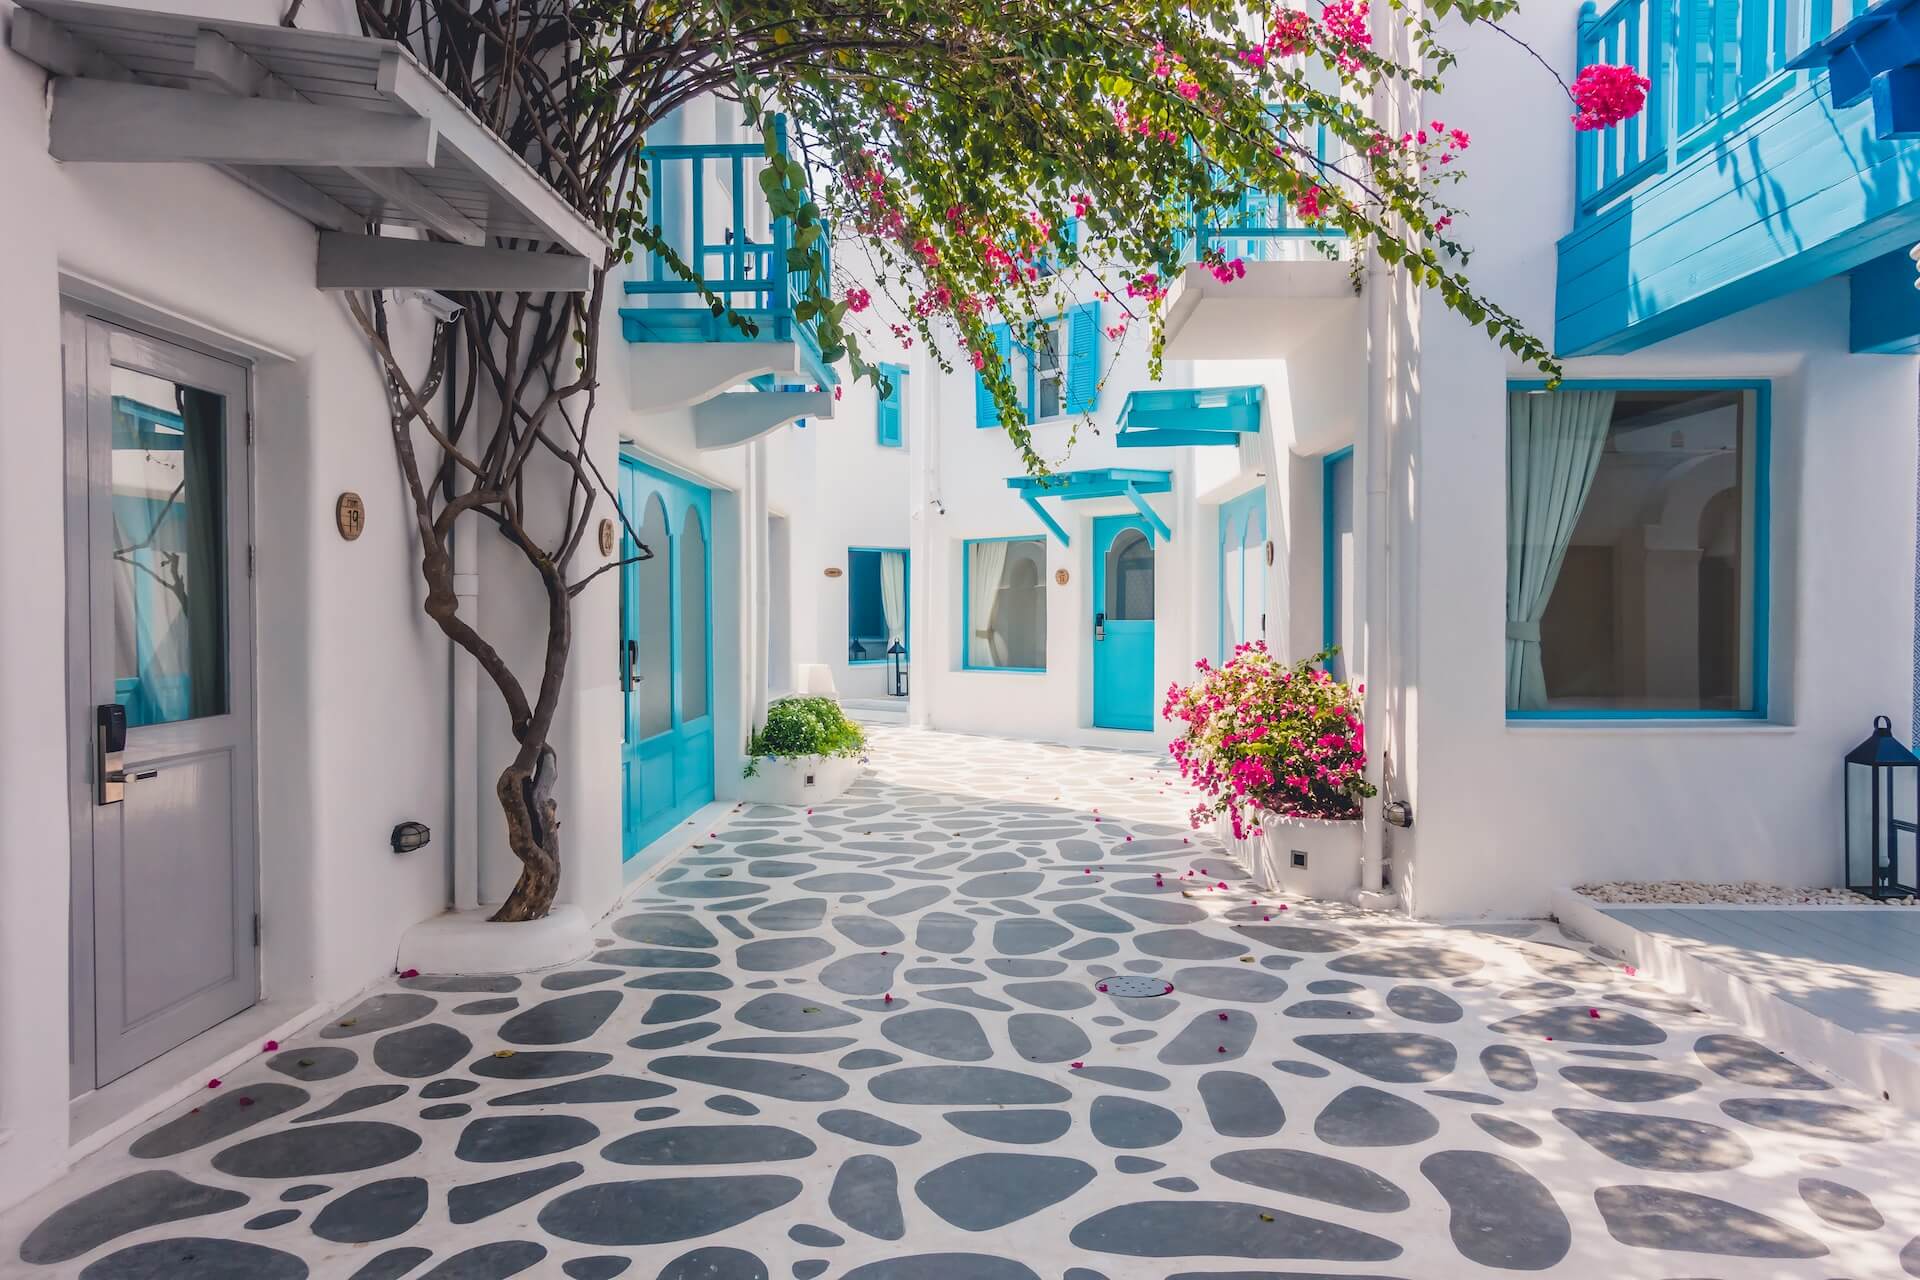 Narrow street in Mykonos town, with white houses surrounded by pink flowers